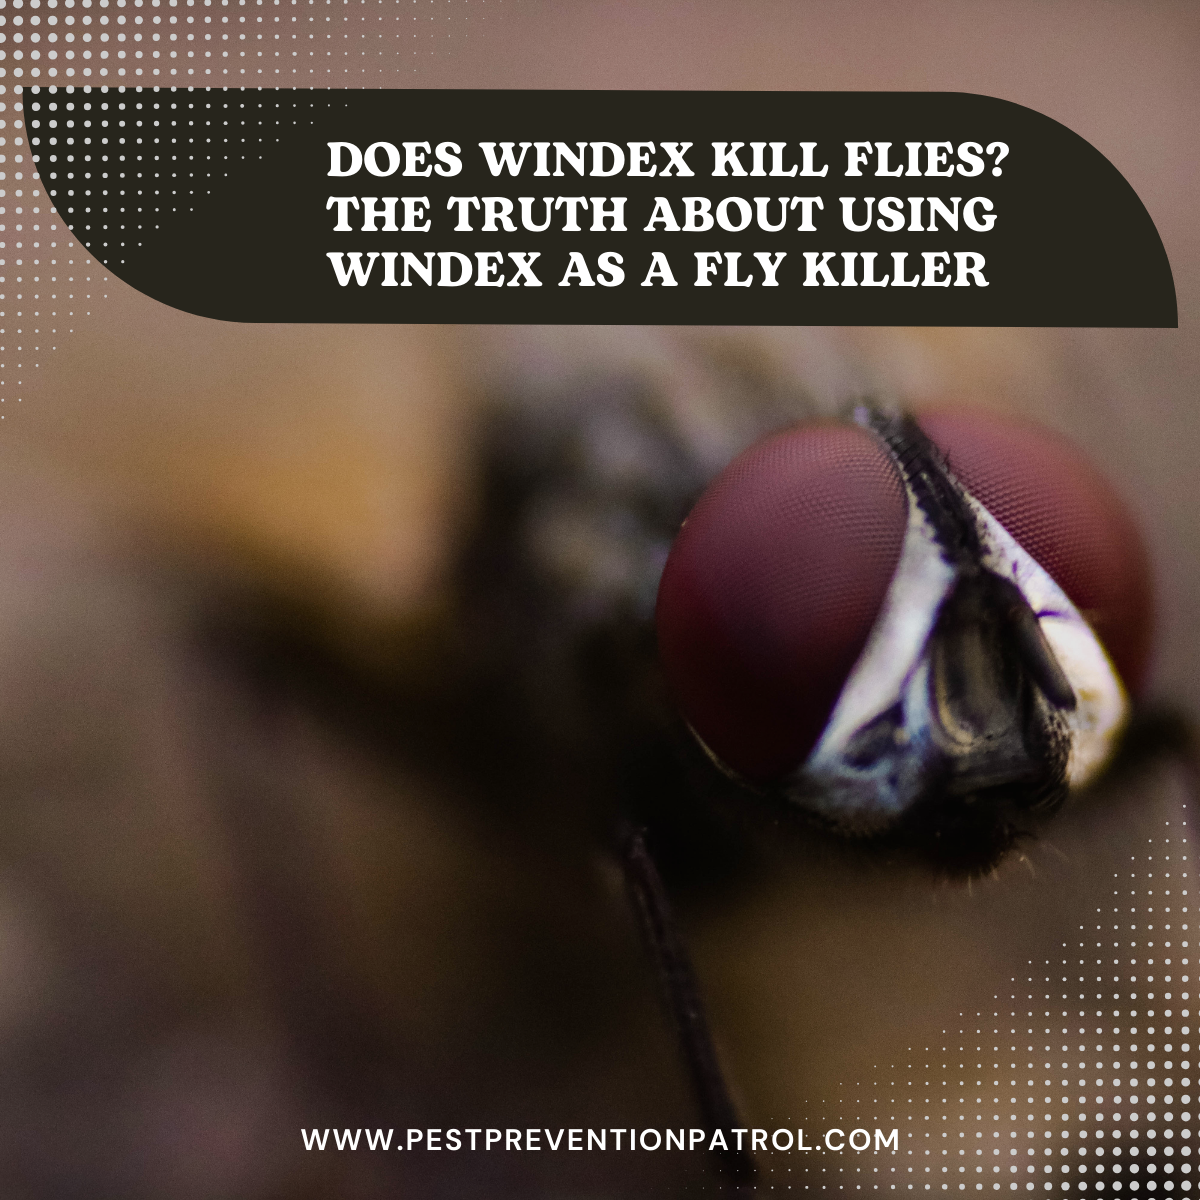 Does Windex Kill Flies_ The Truth About Using Windex as a Fly Killer